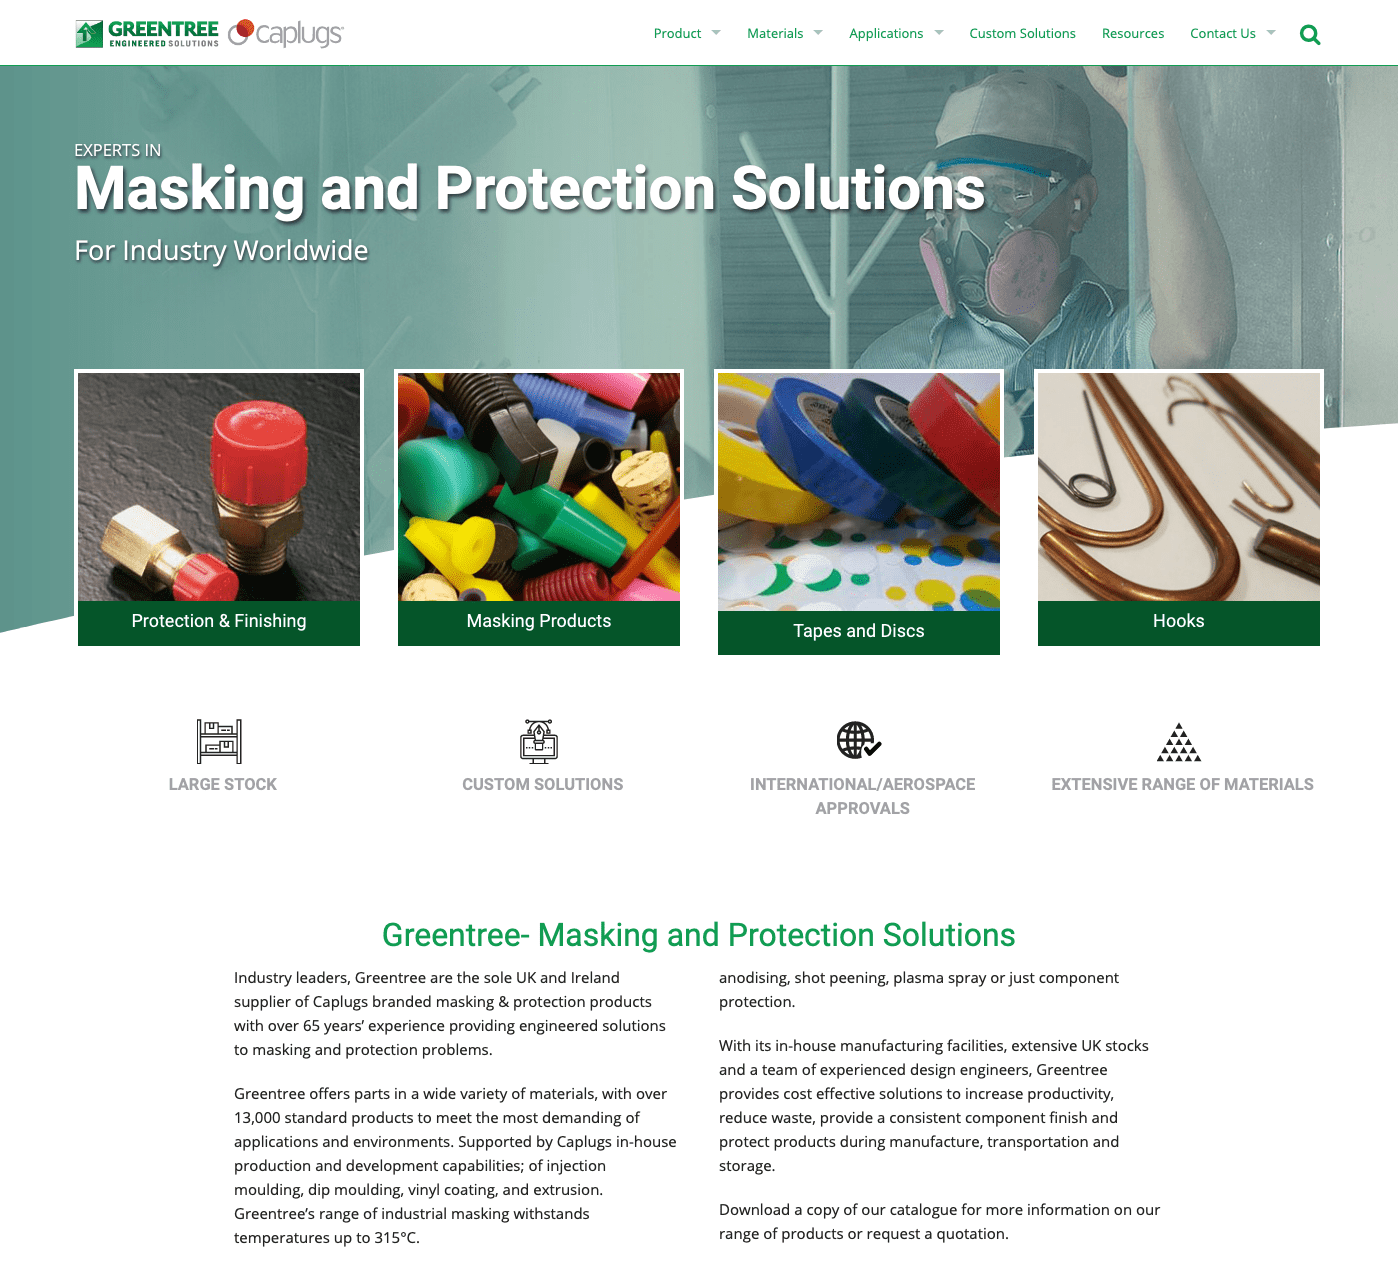 Engineering Supplies - Catalogue Site